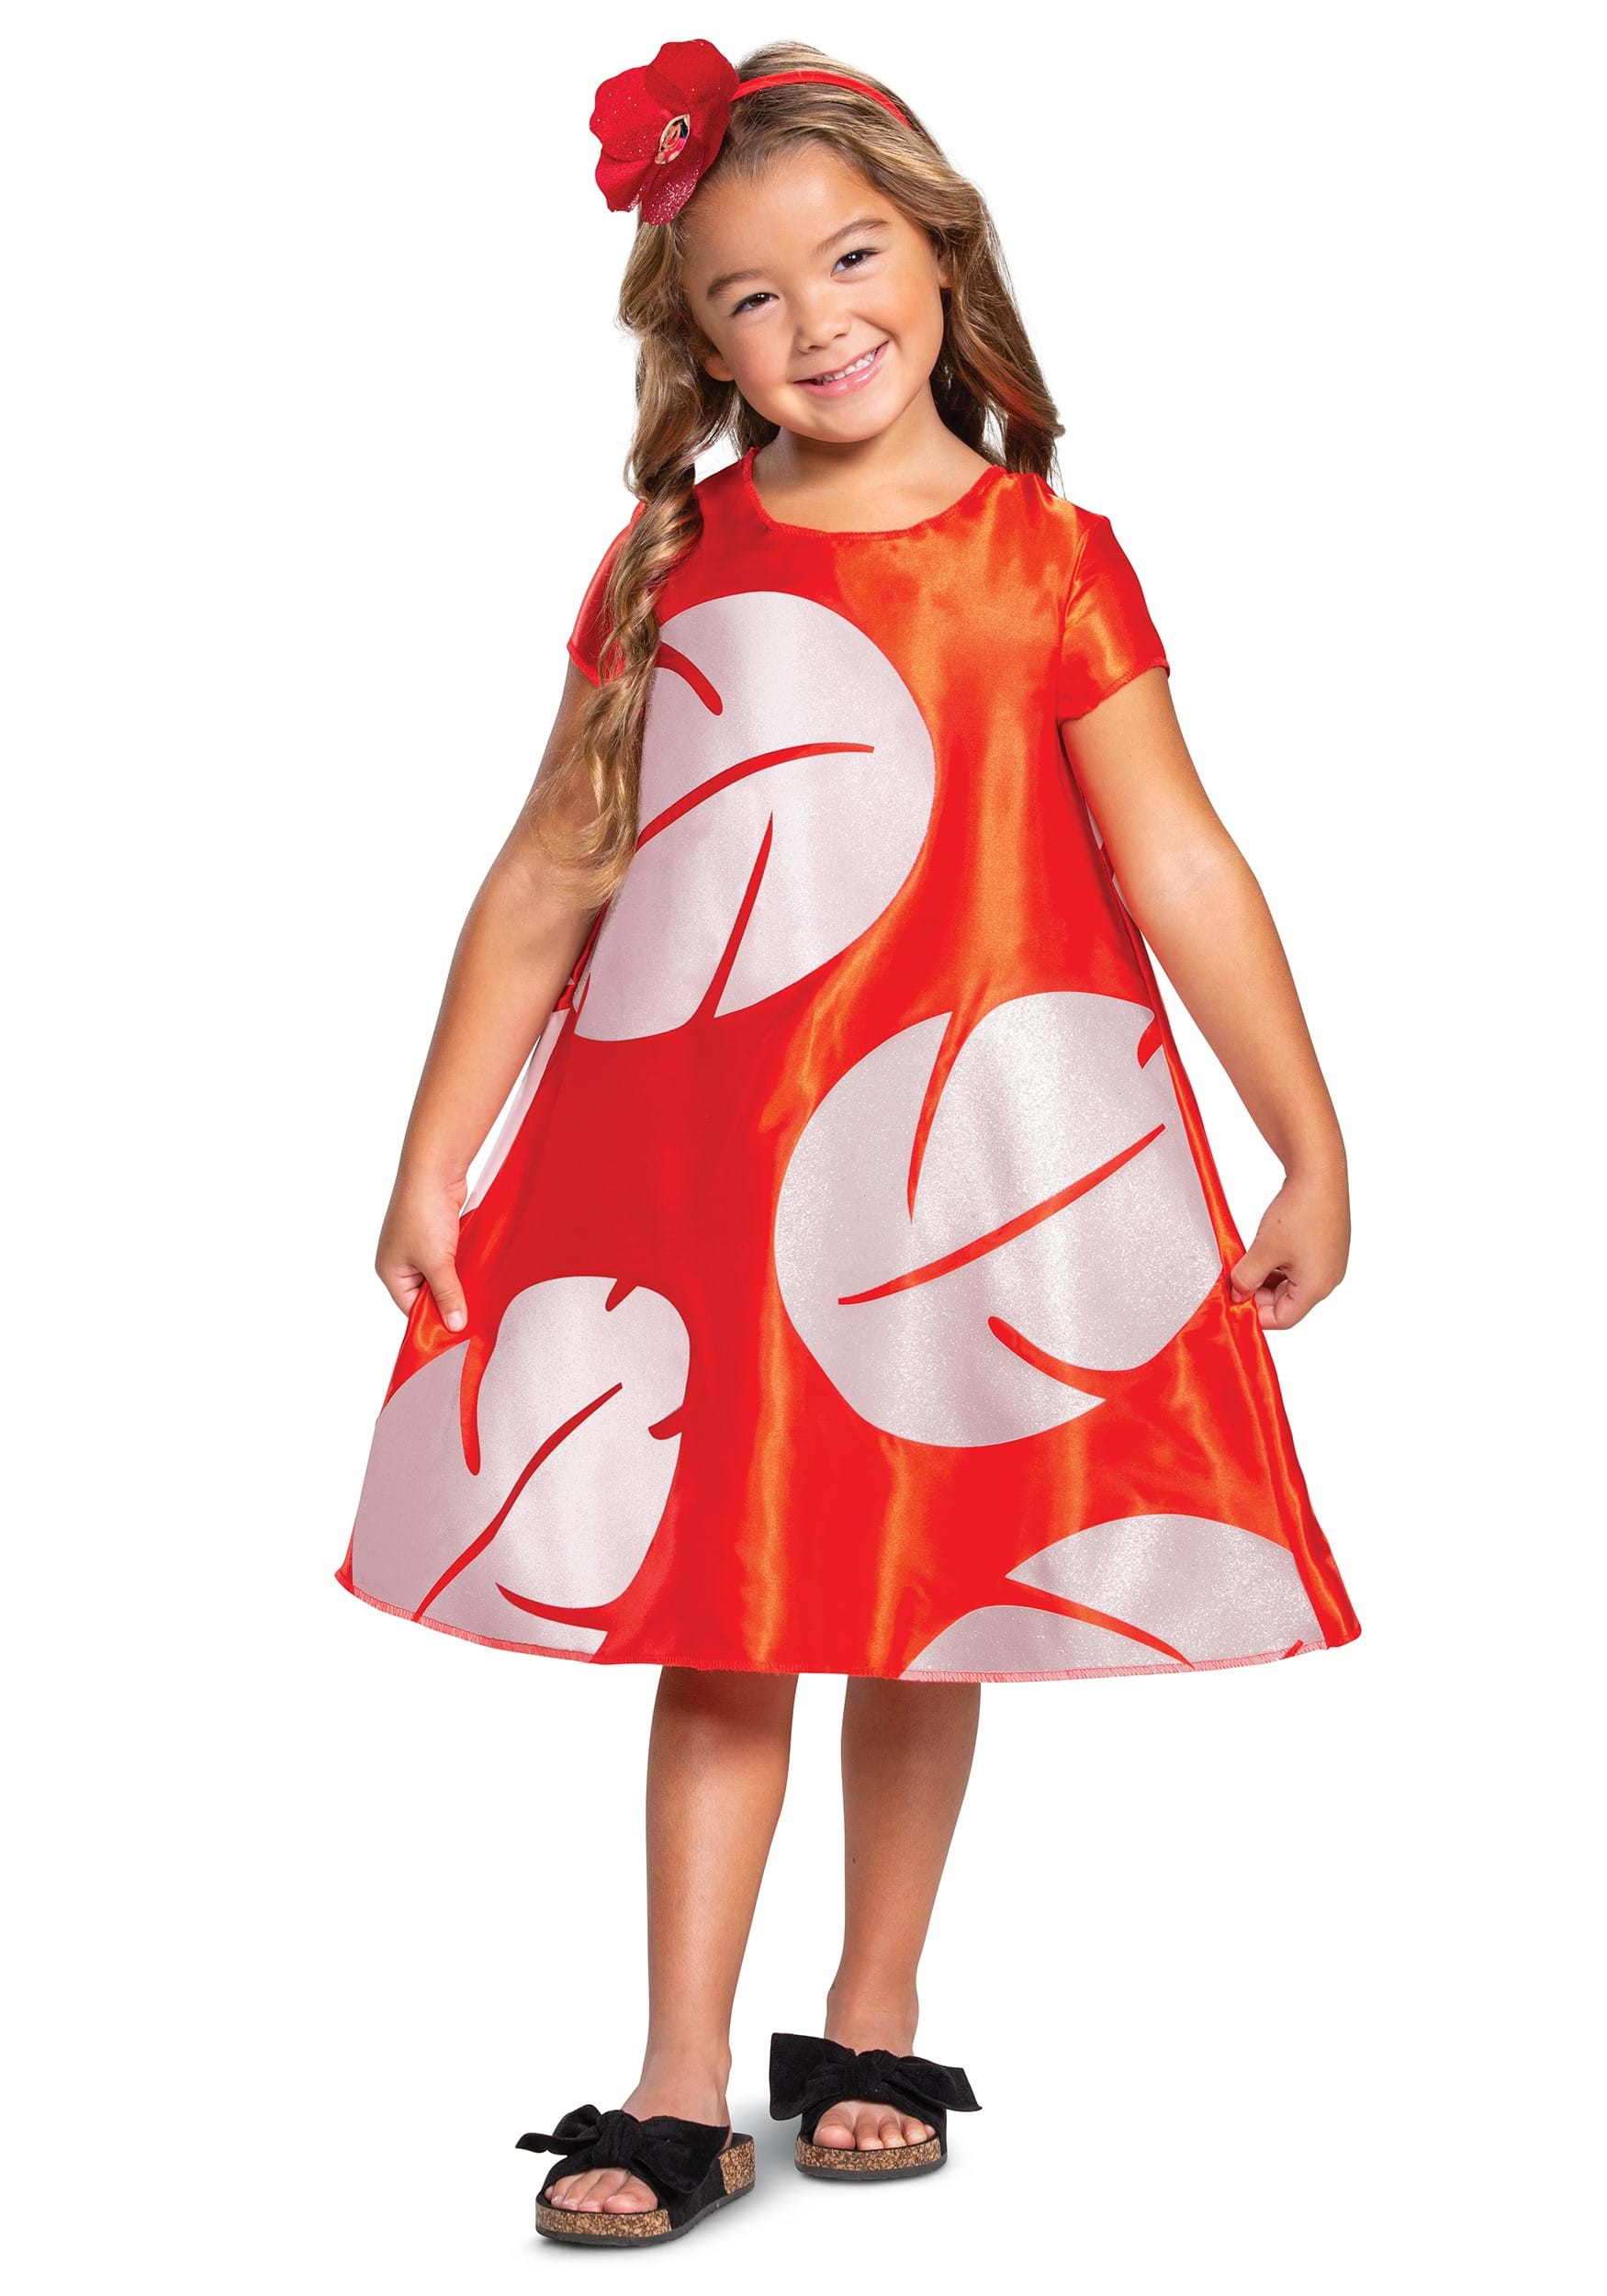 Photos - Fancy Dress Toddler Disguise  Lilo and Stitch Lilo Costume Red/White DI116519 